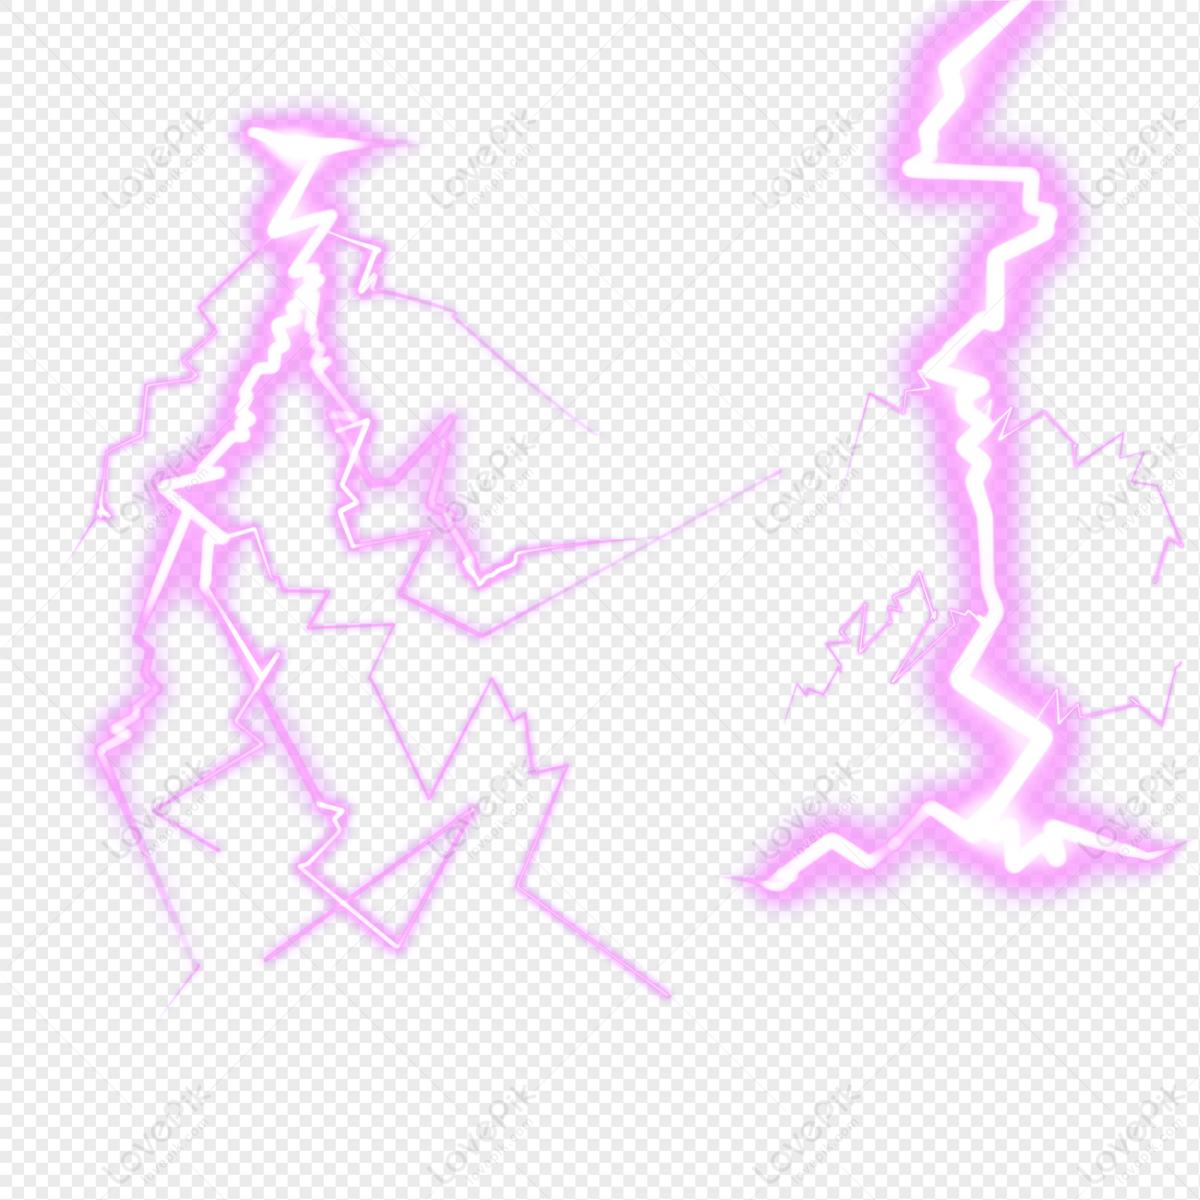 Purple Lightning PNG Transparent Image And Clipart Image For Free Download  - Lovepik | 401458237